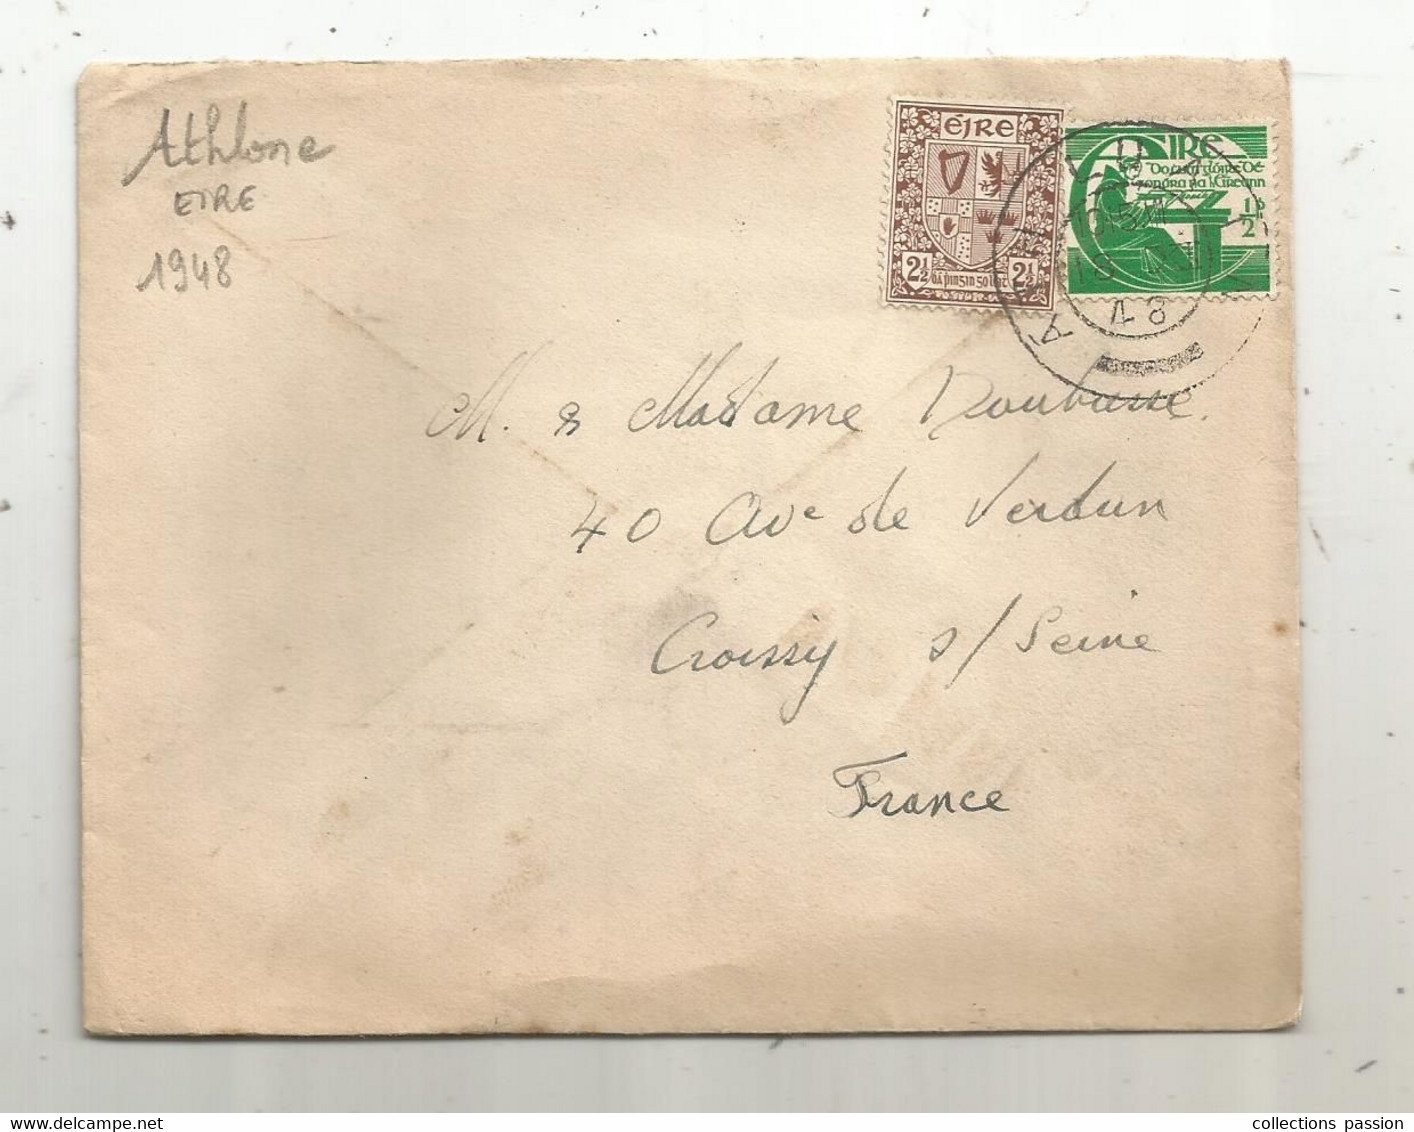 Lettre, Eire , Irlande , ATHLOME ,1948,  2  Scans - Lettres & Documents